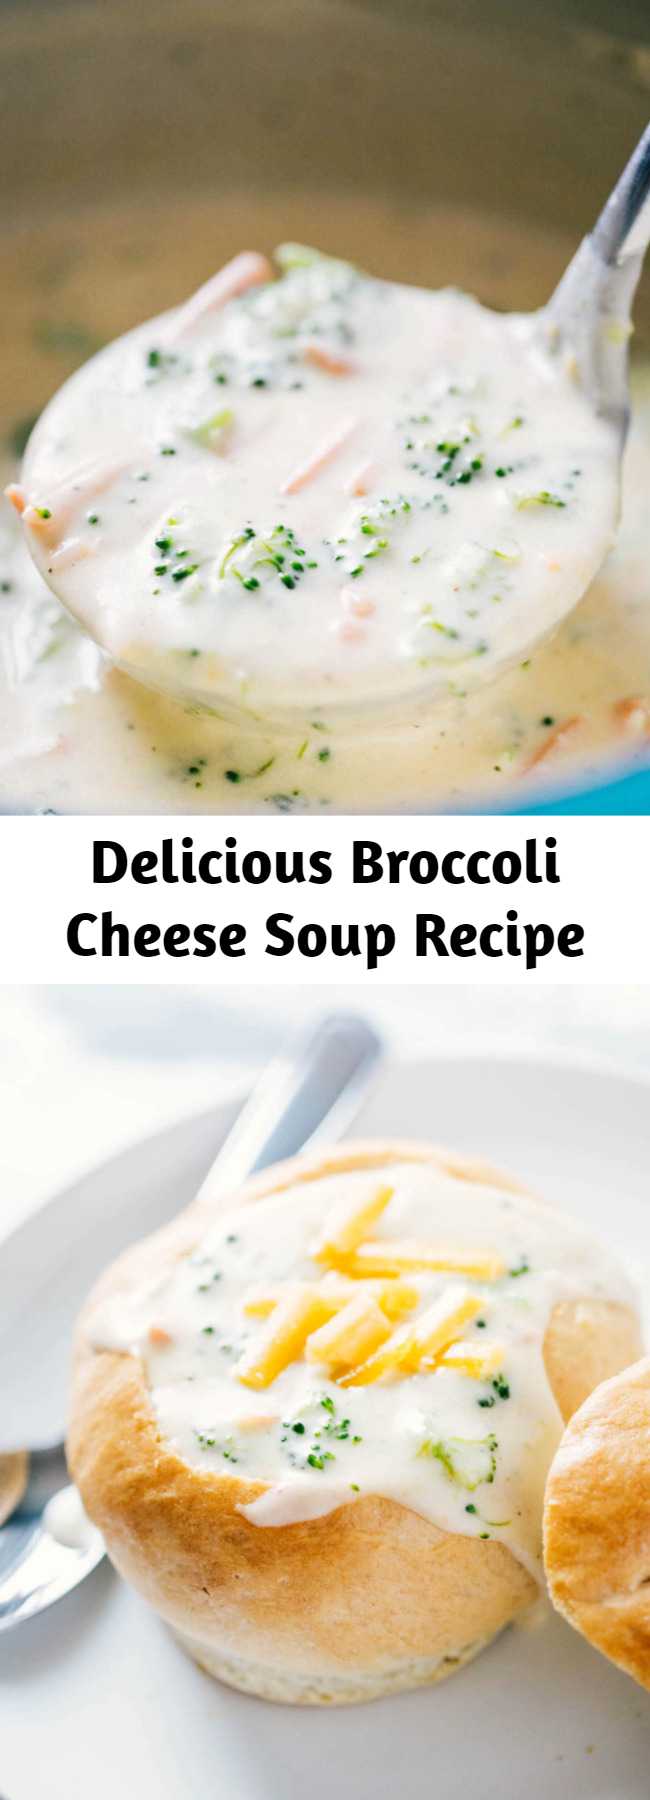 Delicious Broccoli Cheese Soup Recipe - Creamy, delicious and ready to go in 30 minutes! Tastes just like the Panera broccoli cheddar soup and is so easy to make! Serve in a homemade bread bowl to take this broccoli cheese soup recipe over the top! #broccoli #cheese #soup #souprecipes #easyrecipe #homemade #fall #fallrecipes #winter #winterrecipes #cheesy #recipes